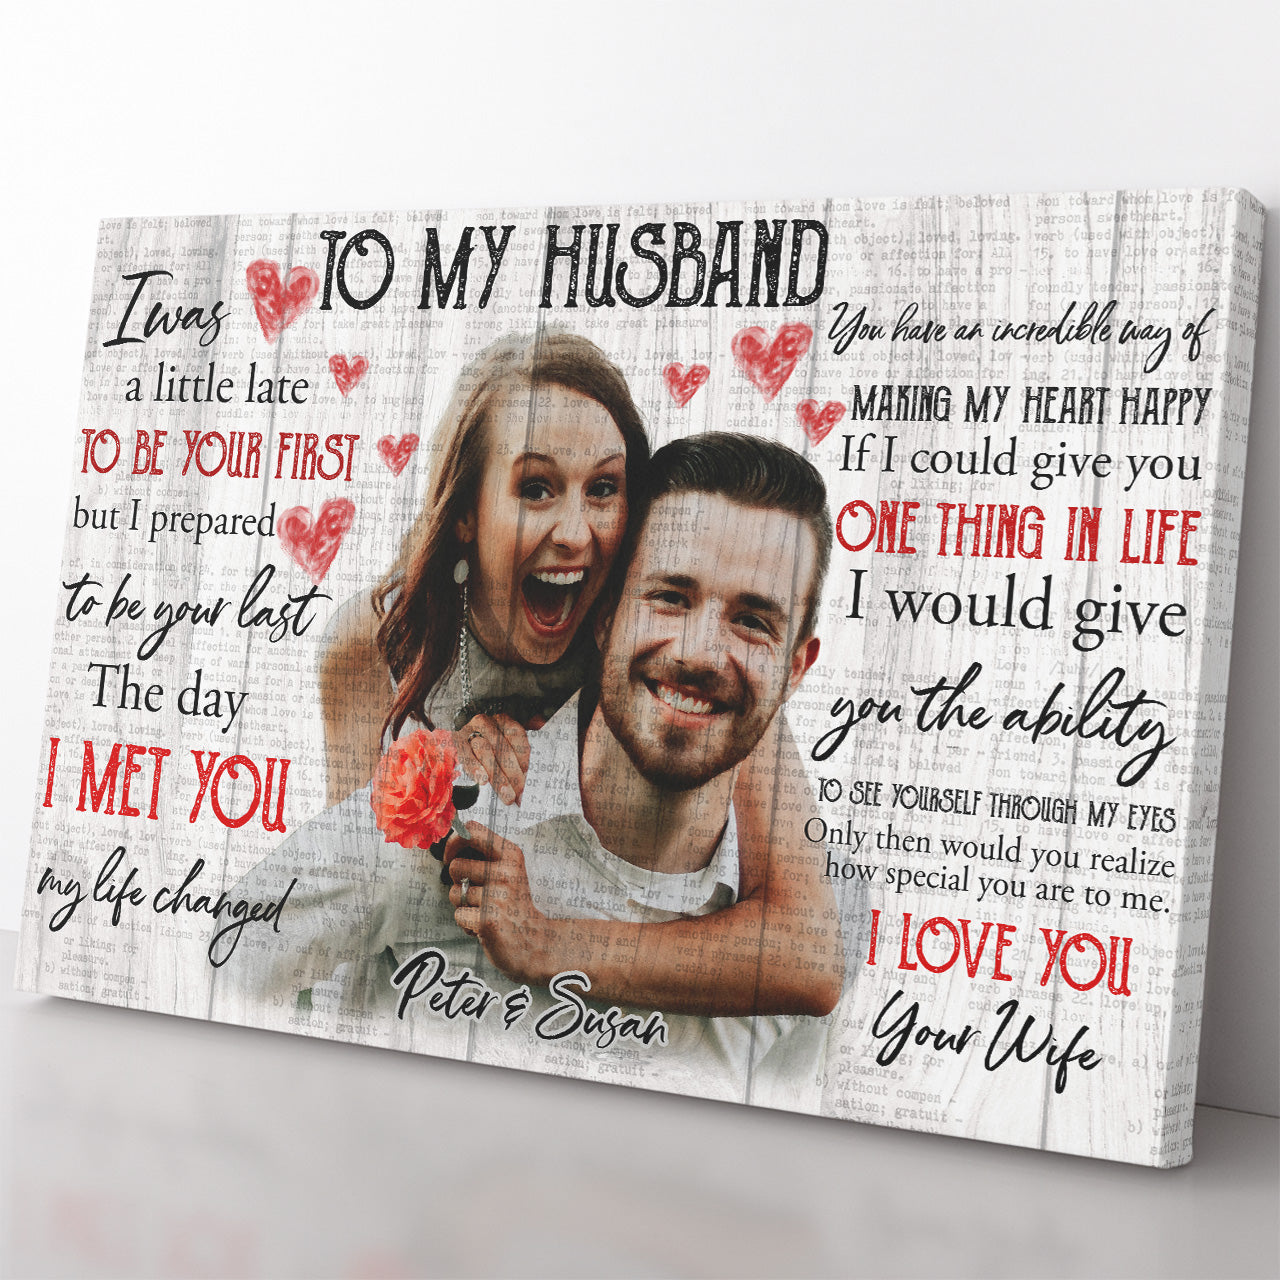 Personalized Canvas Gift Ideas to My Husband, I Was a Little Late 20121803